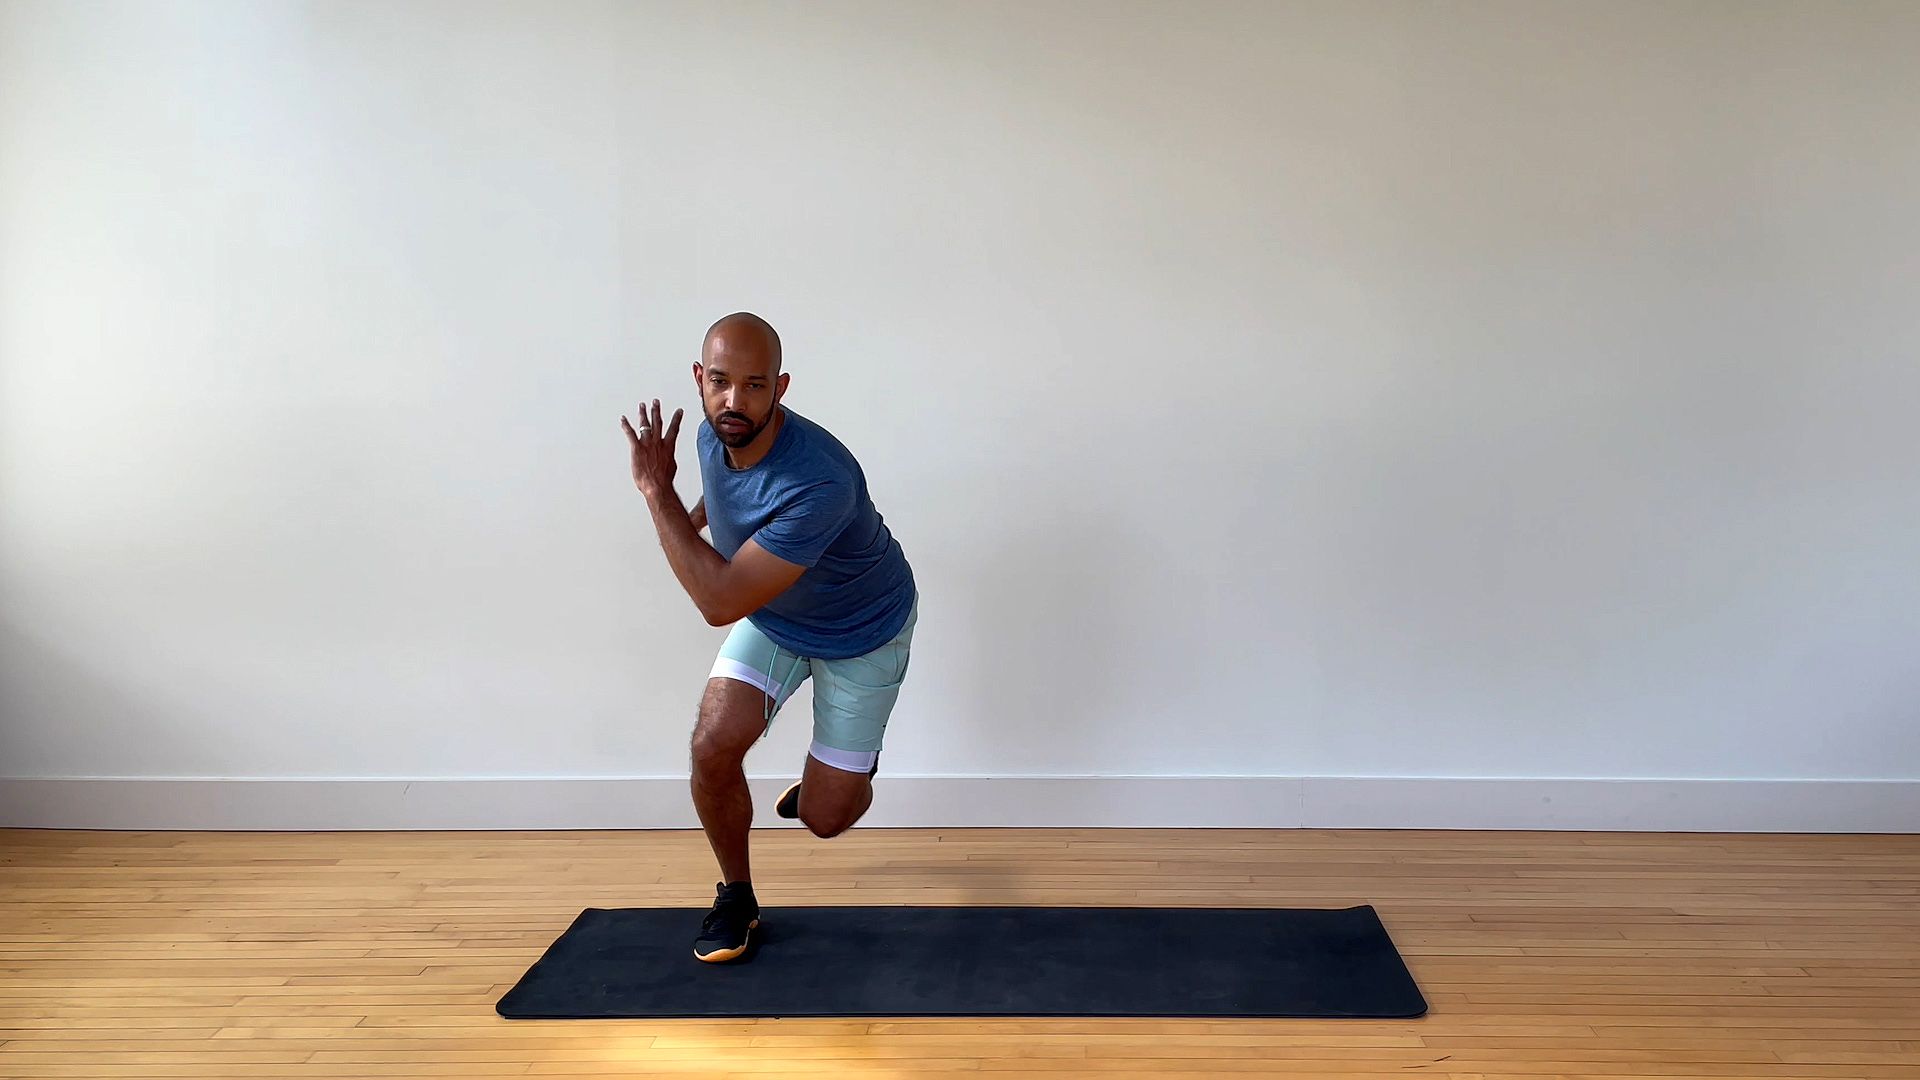 4 Hip Mobility Moves to Do When Sitting - Precision Movement